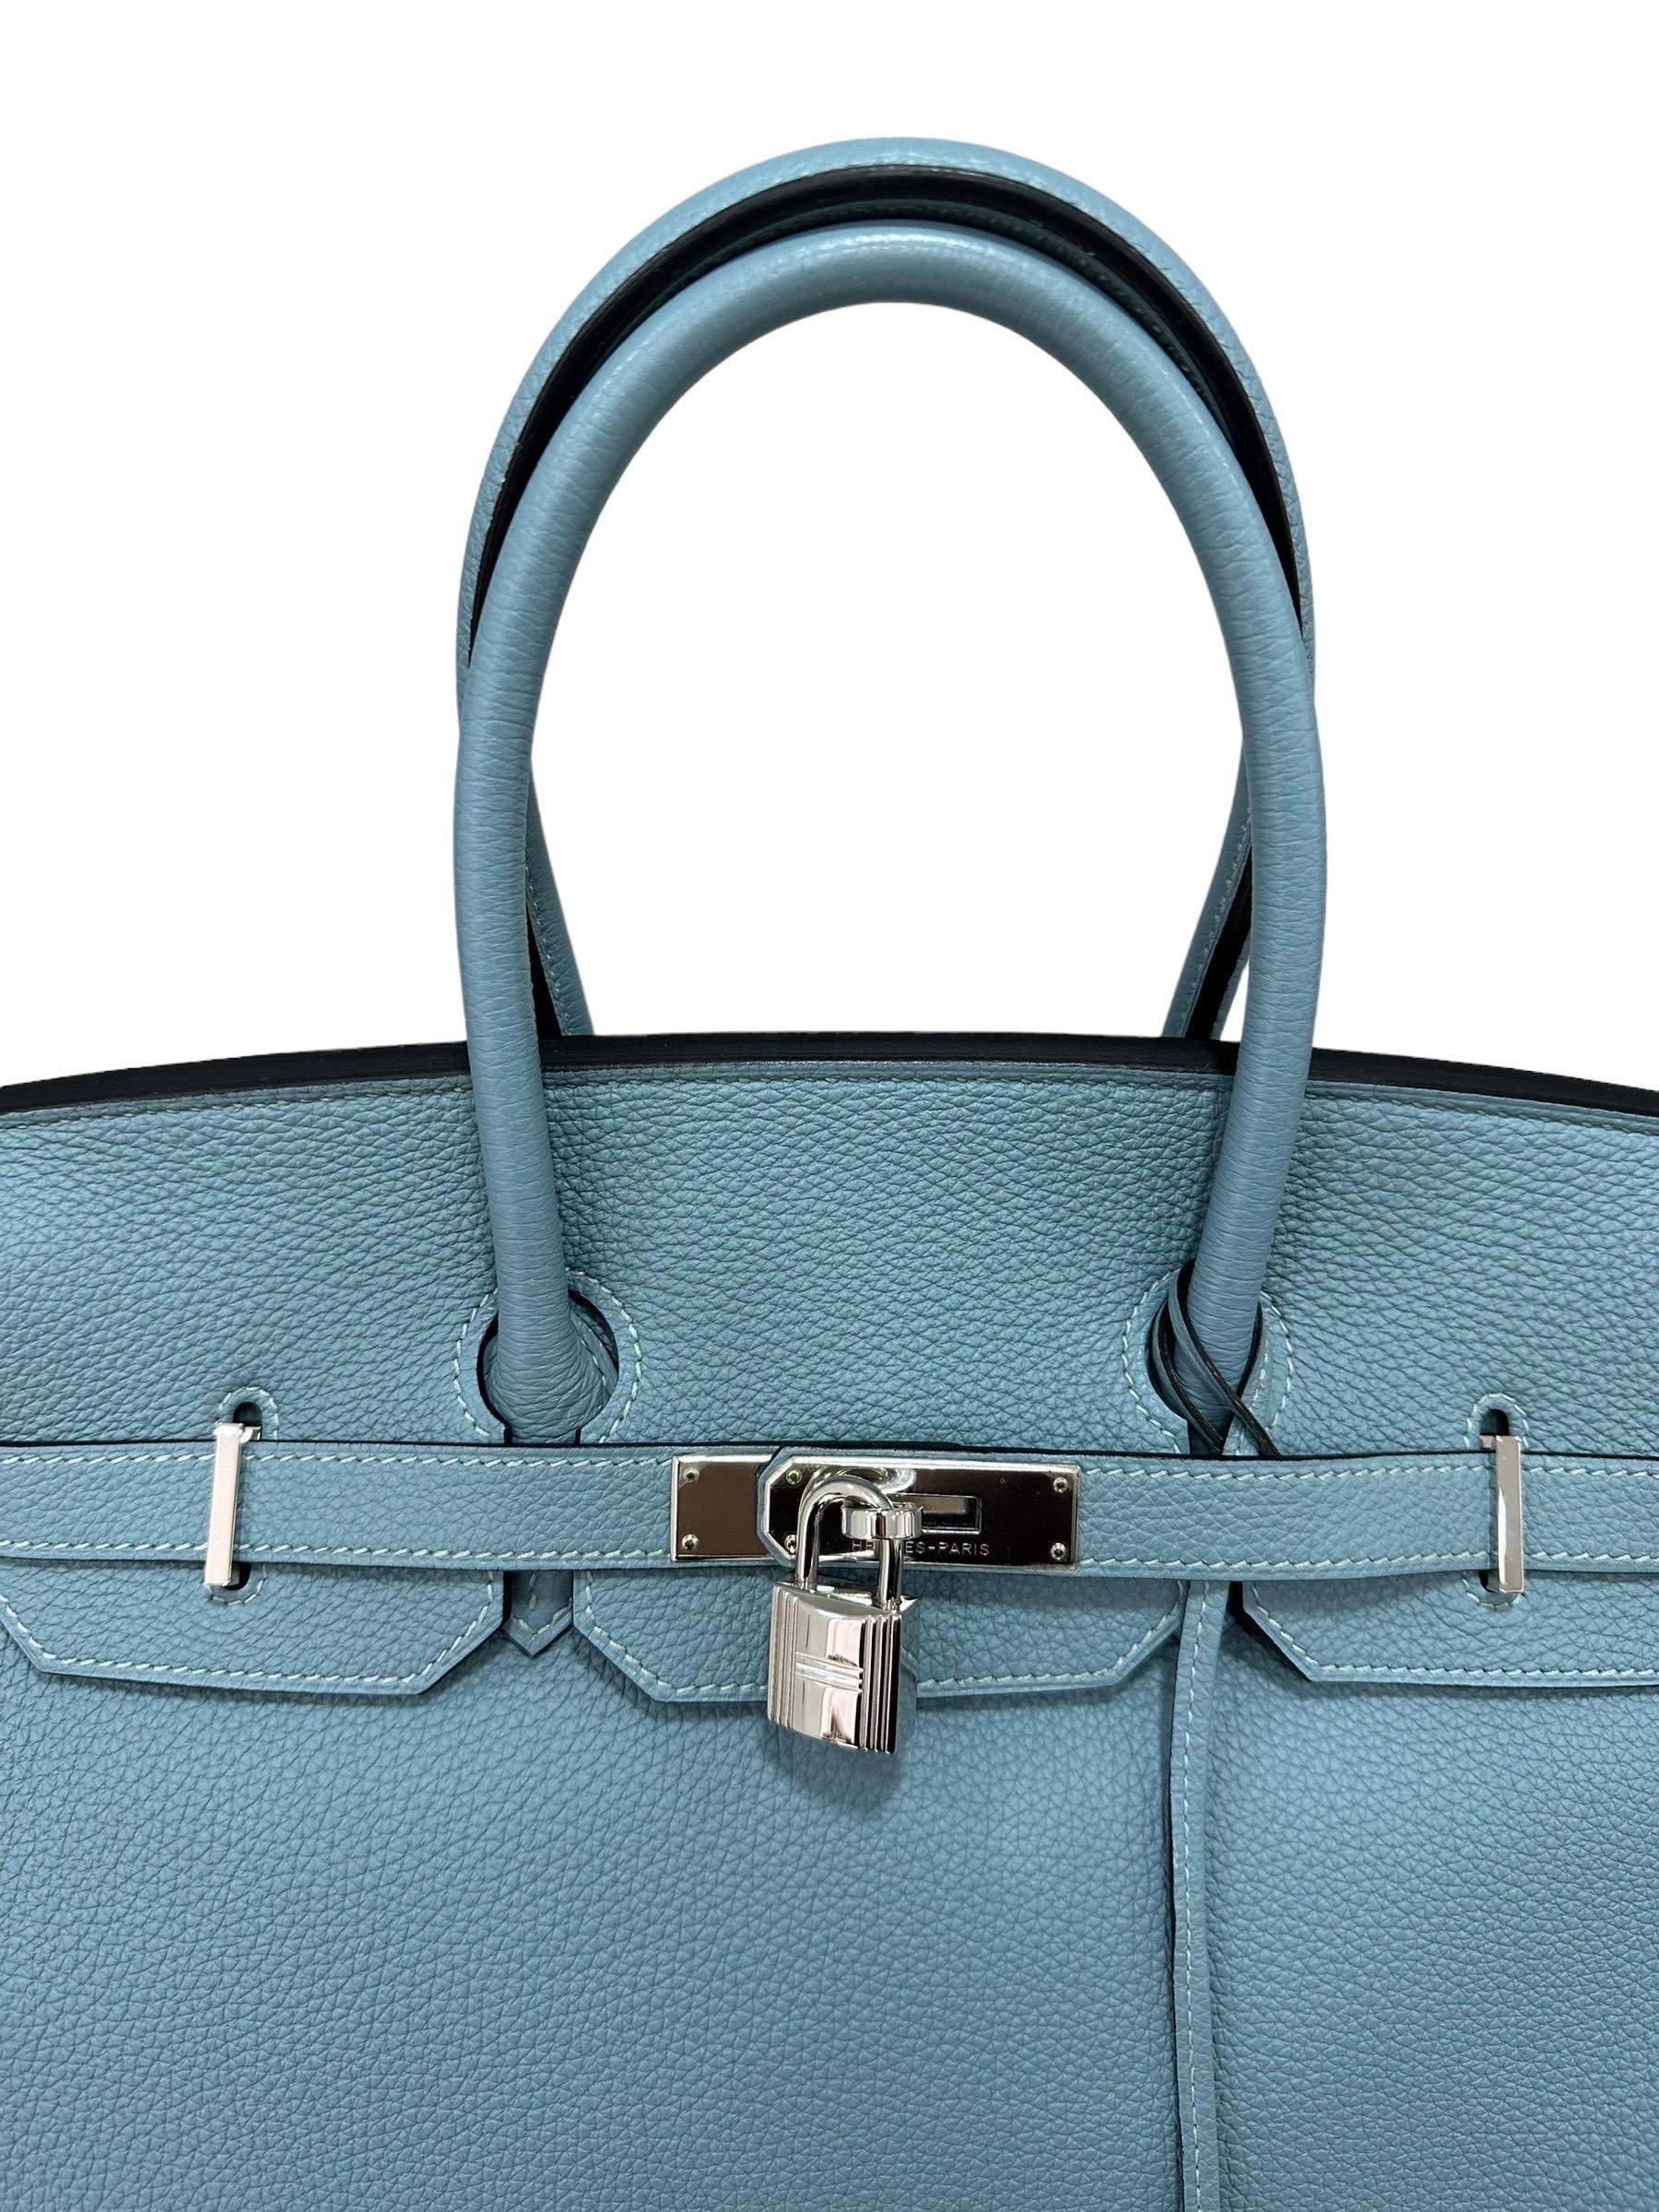 Hermès handbag, Birkin model, size 35, made of sky blue togo leather with silver hardware. Equipped with the classic flap with interlocking closure and buckle. Complete with padlock with clochette and keys. Internally lined in leather, very roomy,